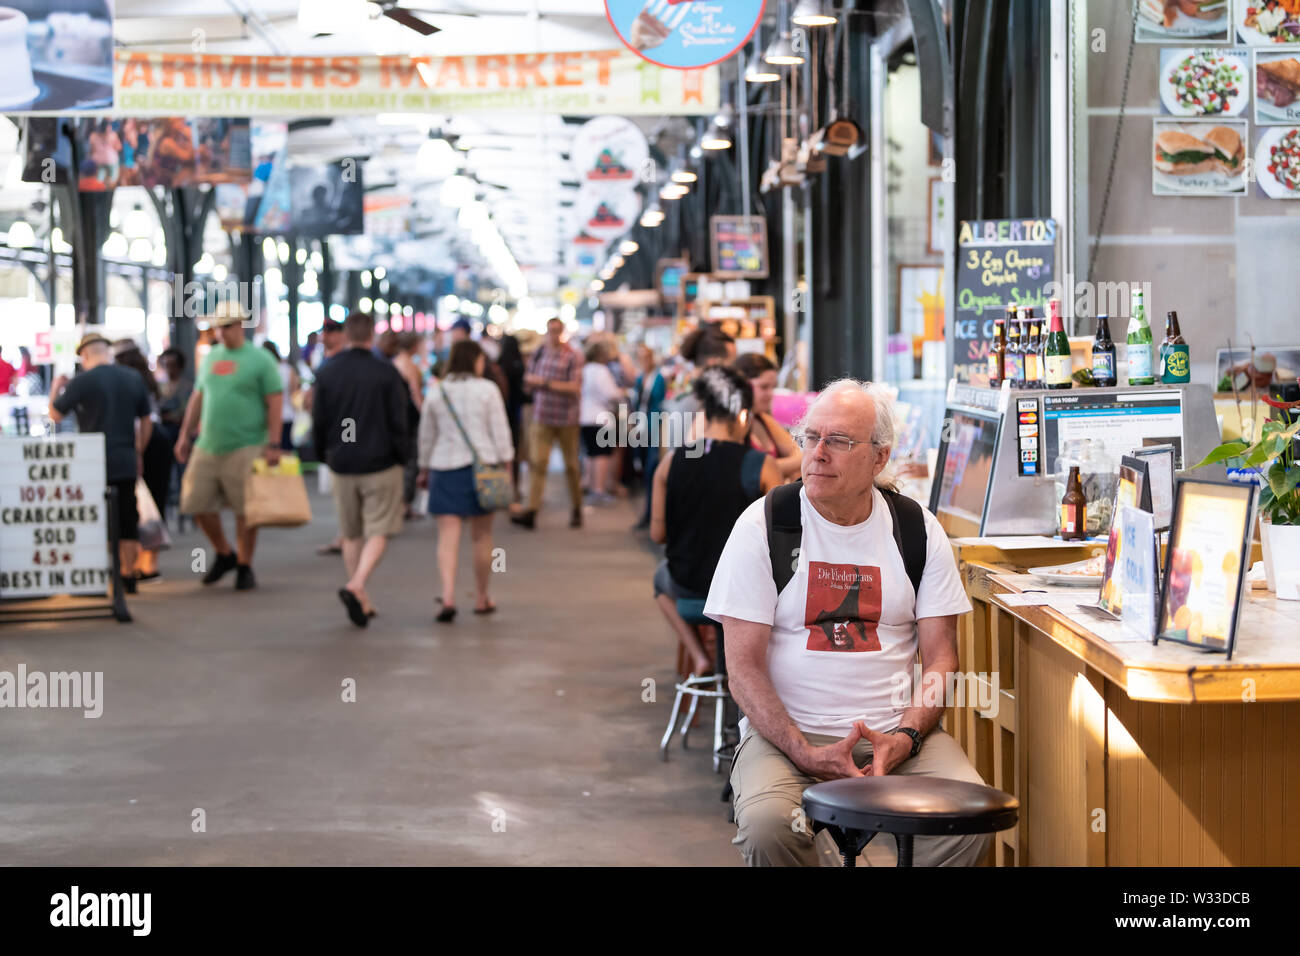 New Orleans, USA - April 23, 2018: Inside of old town French Quarter outdoor covered arcade food flea market in Louisiana city, people shopping eating Stock Photo